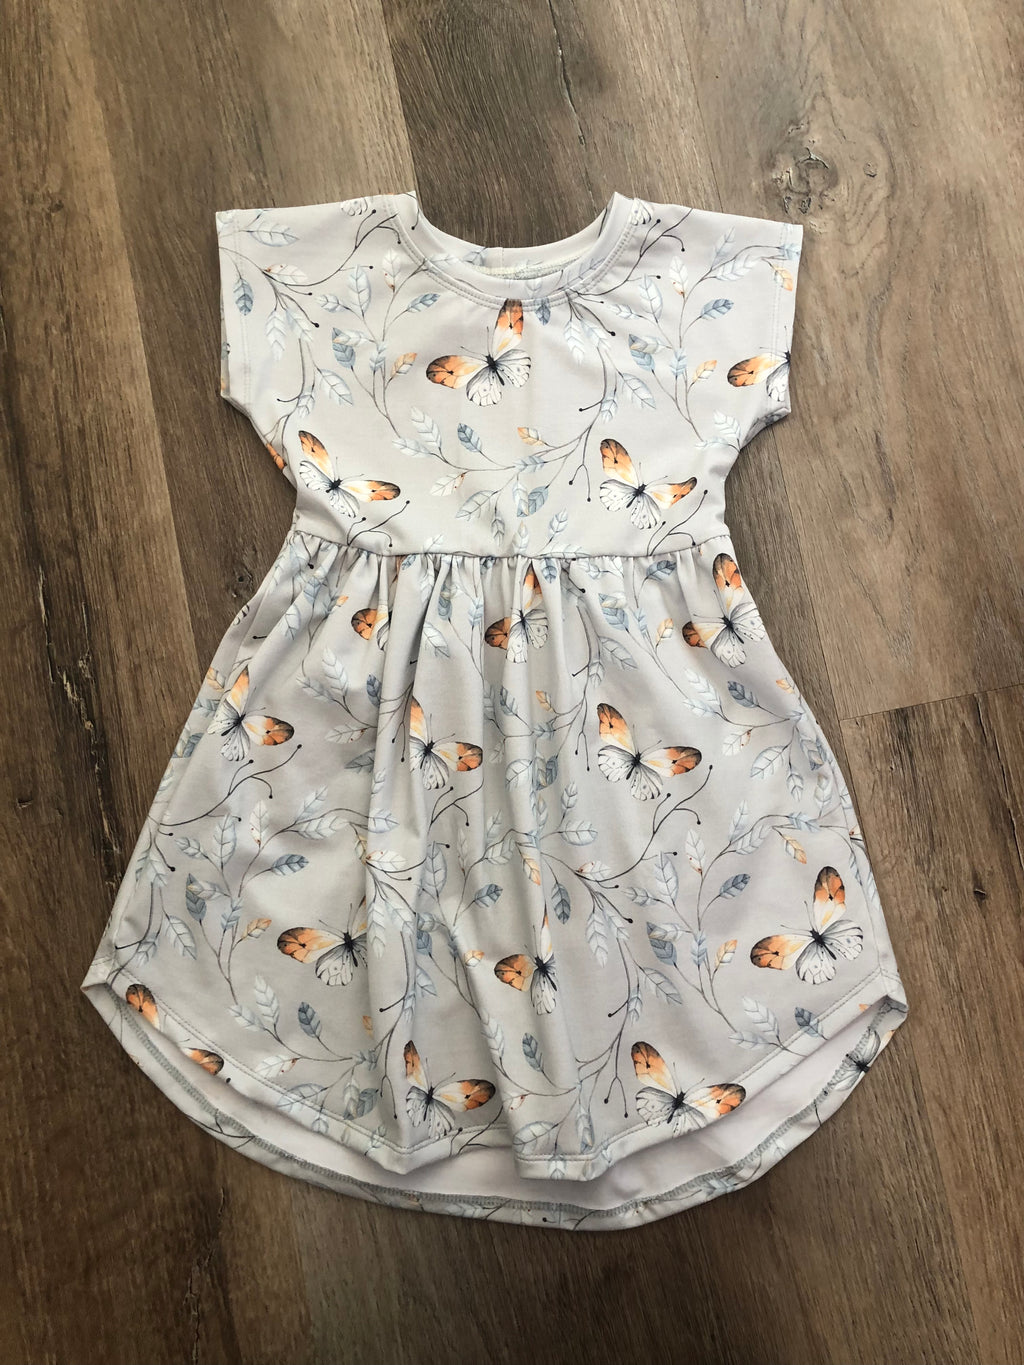 Frosted Flutters Pearlie Dress size 1, 4